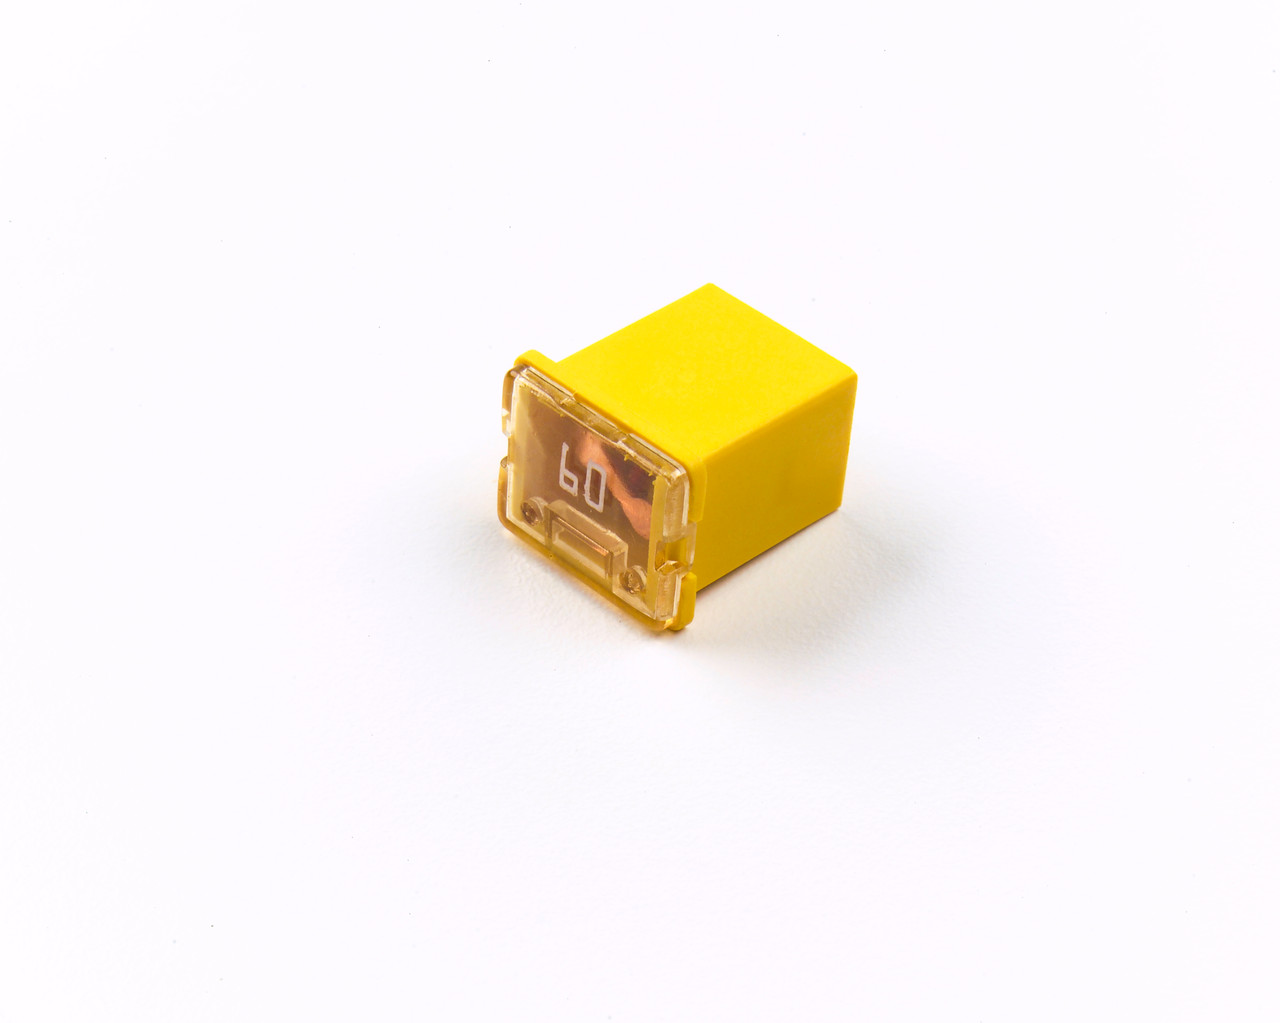 Cartridge "Link" Fuse Low Profile 60A 32V - Yellow  82-FMXLP-60A